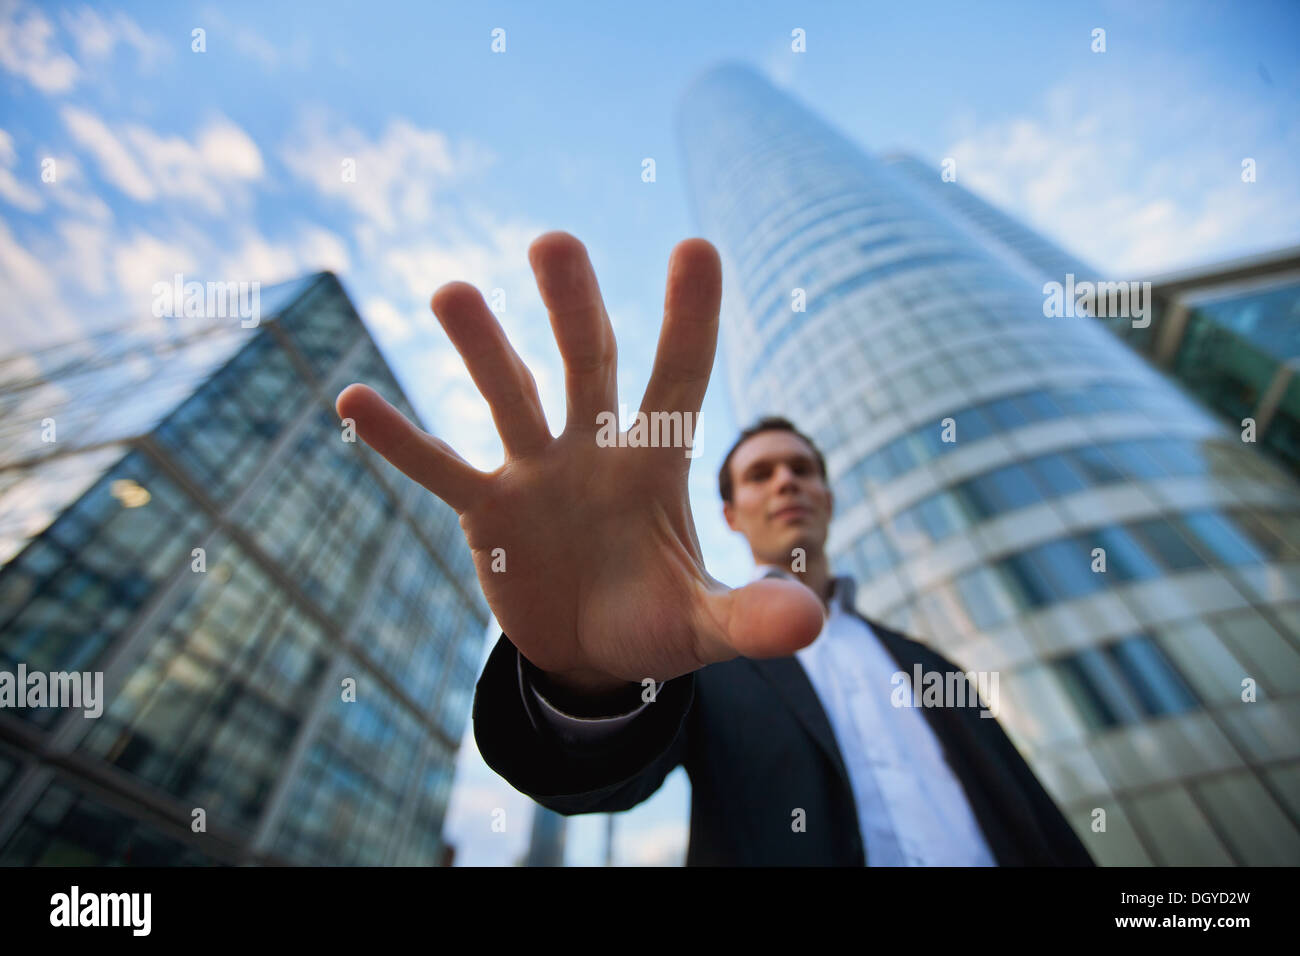 threat in business, steal money Stock Photo